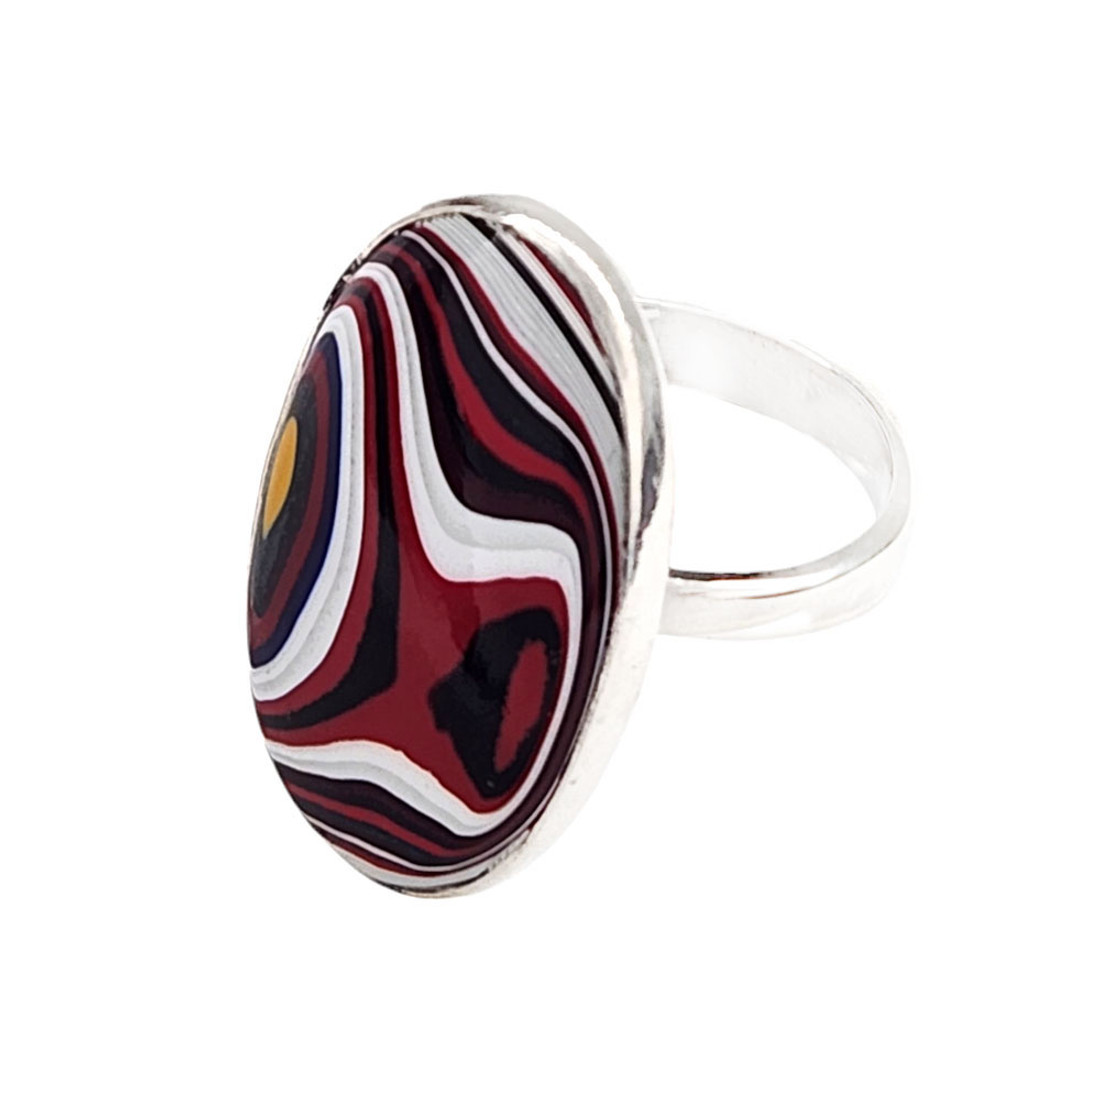 Oval red and colorful Fordite adjustable ring.